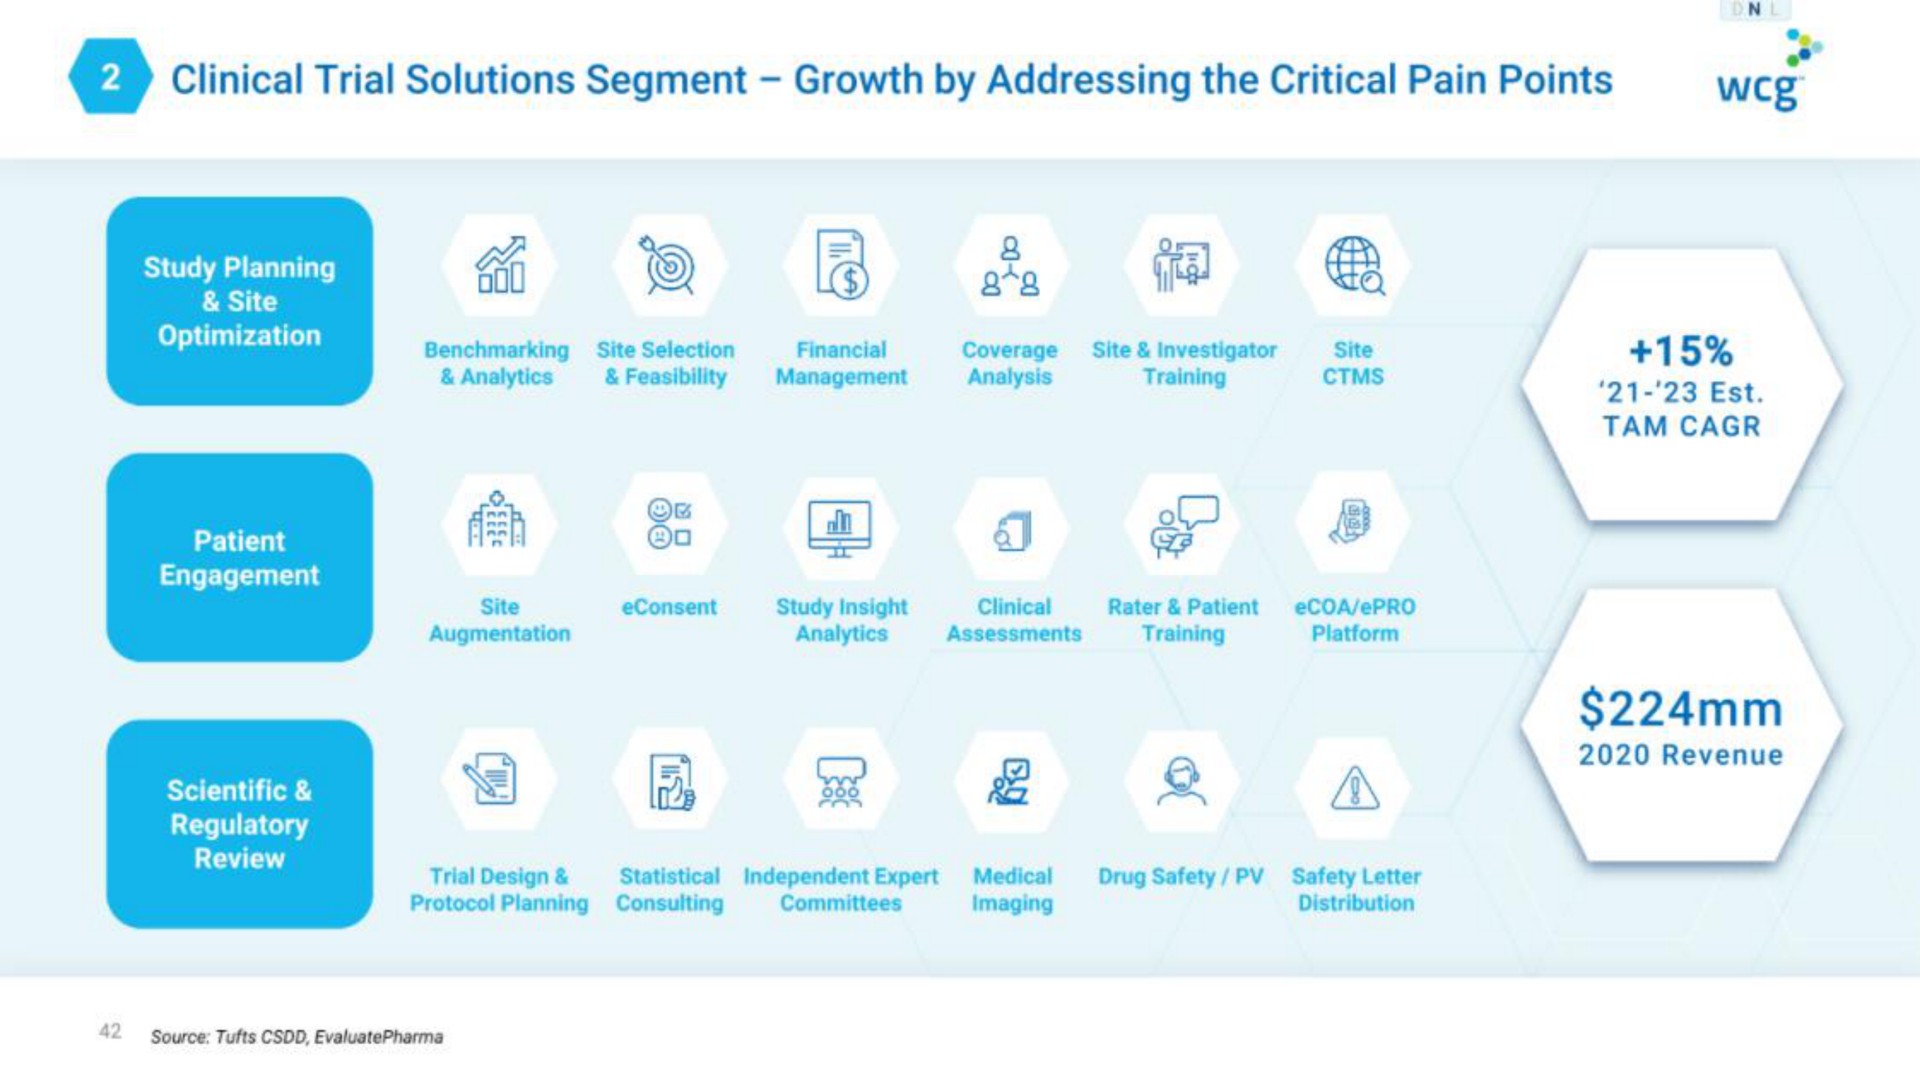 a clinical trial solutions segment growth by addressing the critical pain points a | WCG